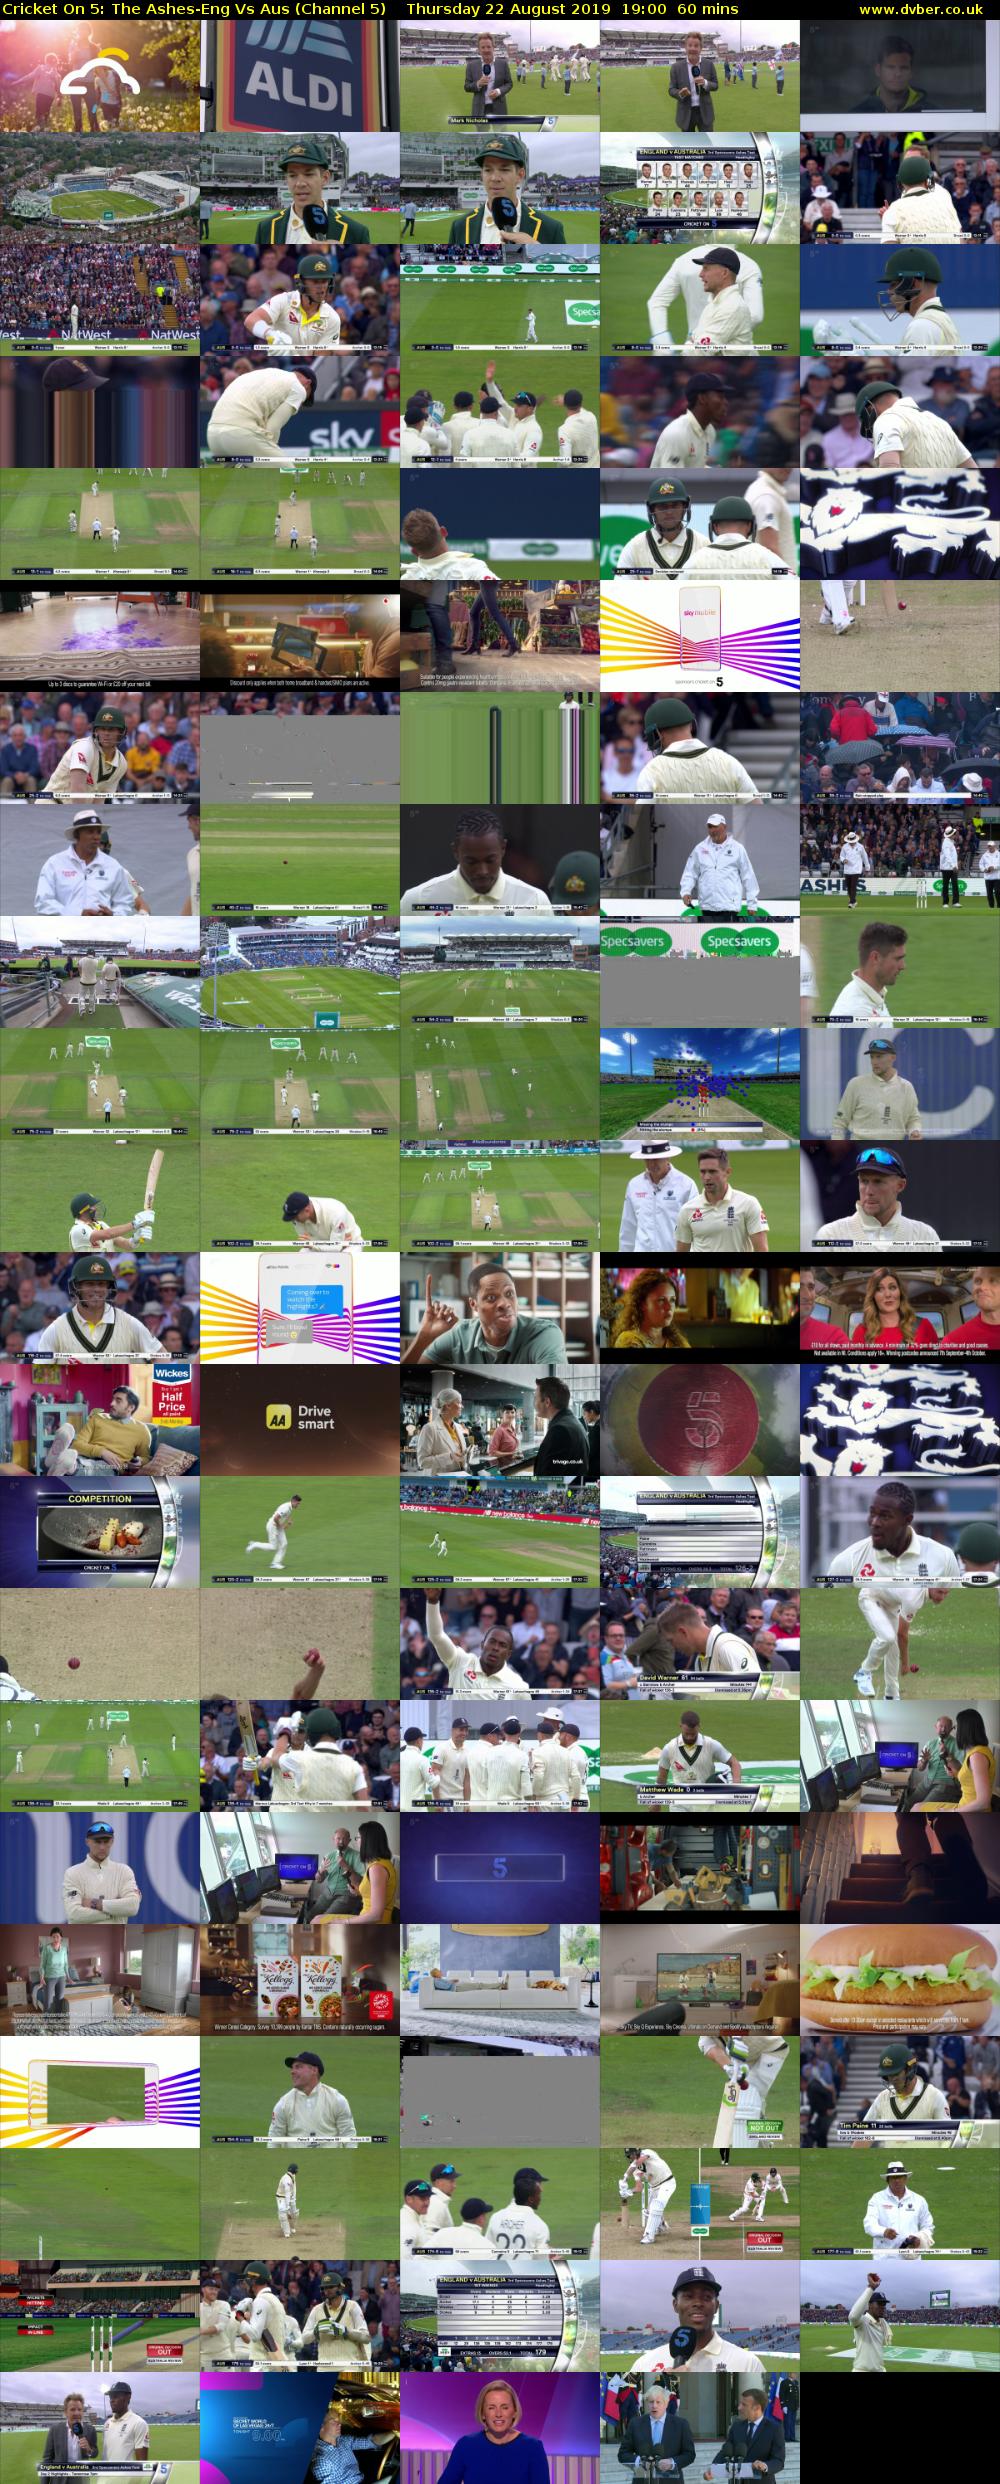 Cricket On 5: The Ashes-Eng Vs Aus (Channel 5) Thursday 22 August 2019 19:00 - 20:00